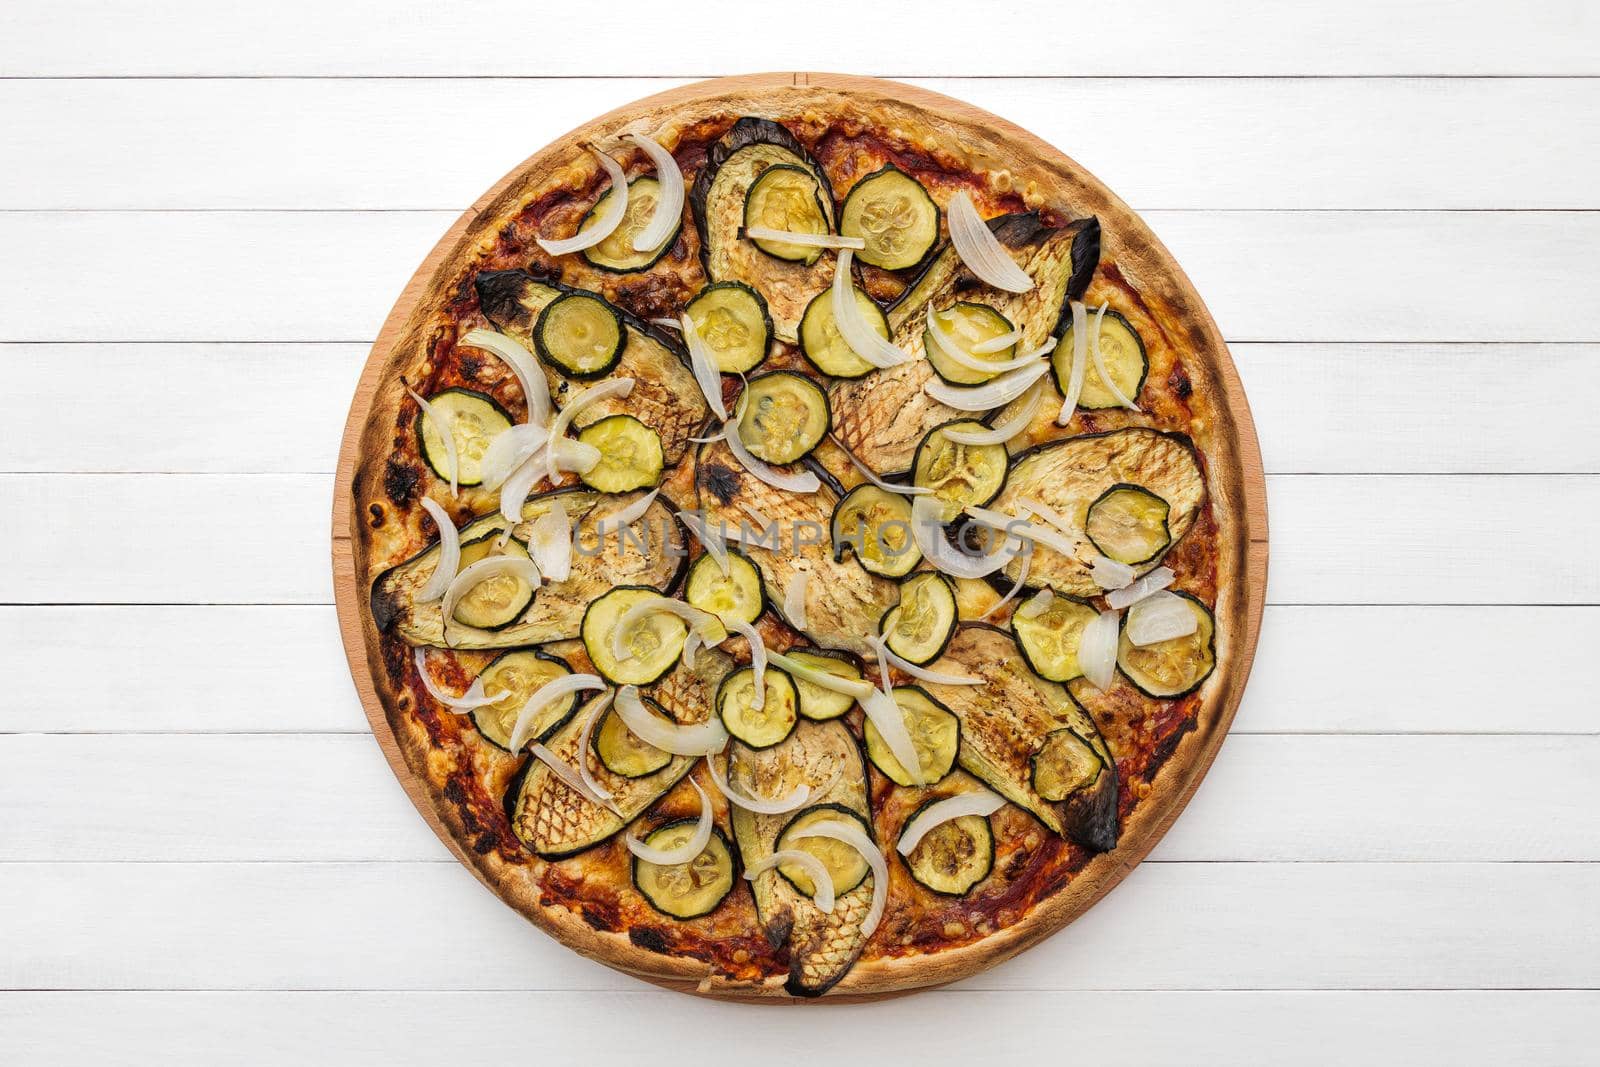 Whole vegetarian pizza topped with grilled eggplant, zucchini and onion, on wooden plate. Top view on white board background. Copy space.